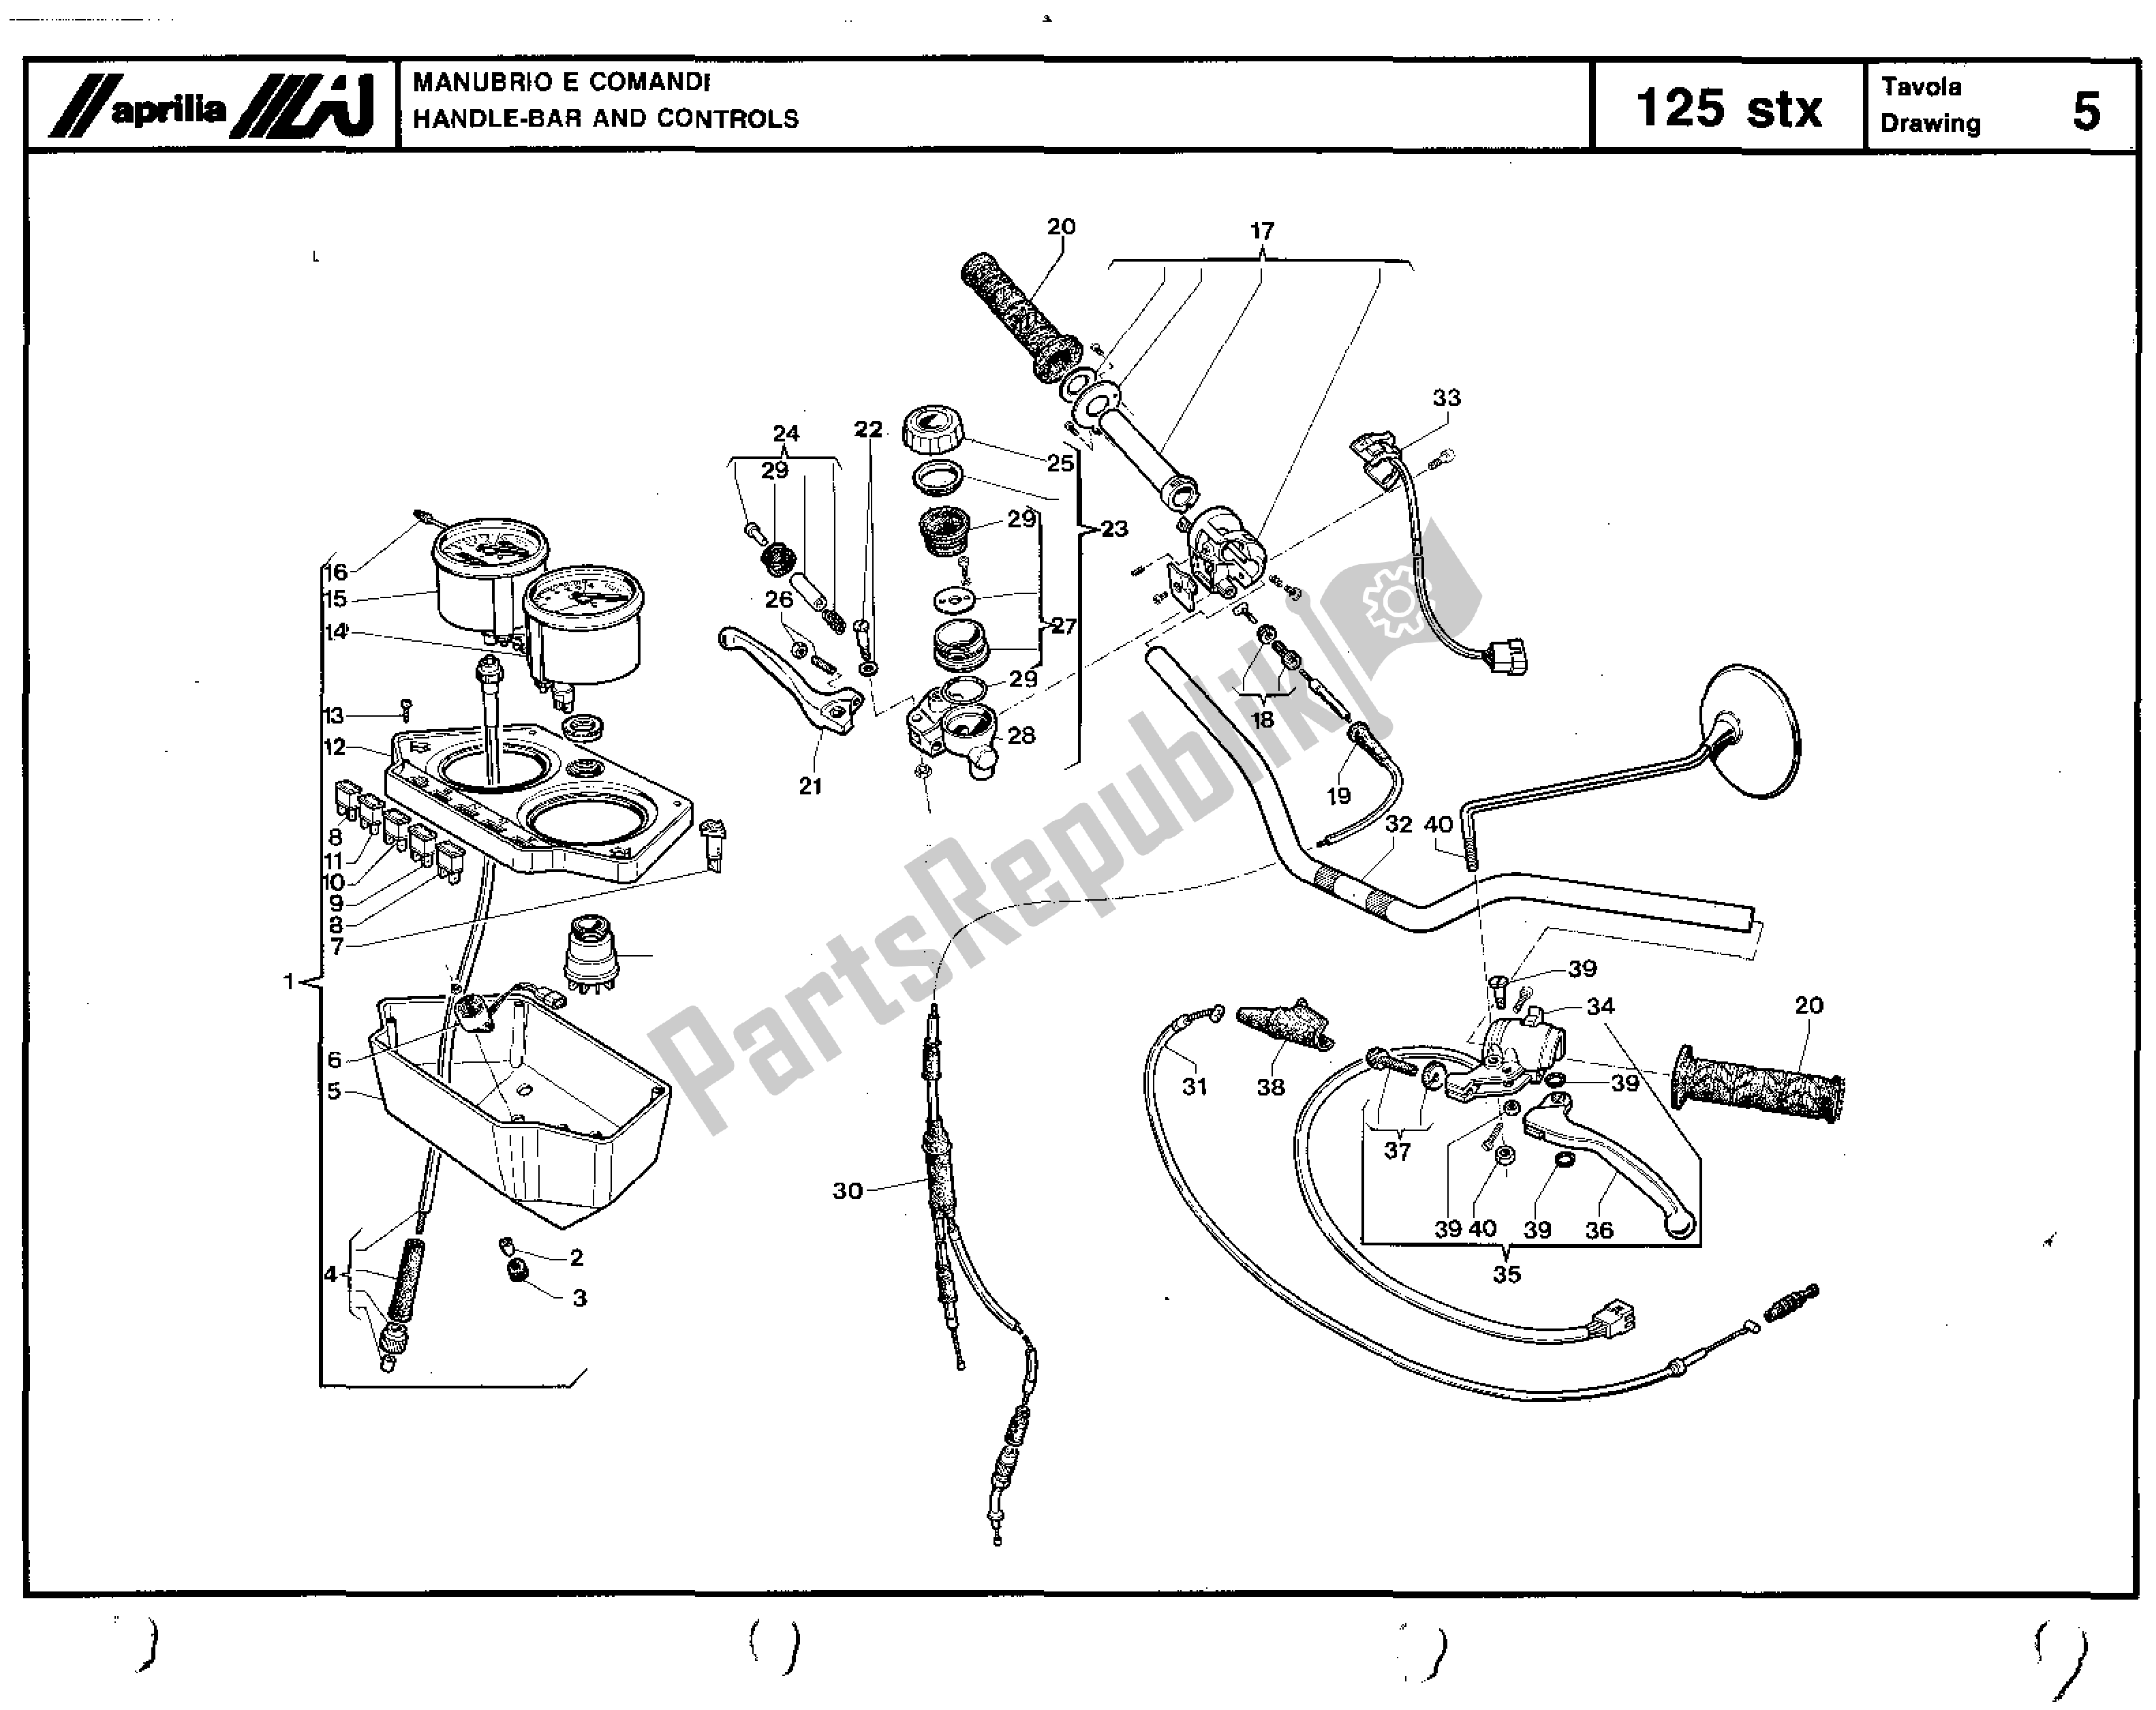 All parts for the Handle Bar And Controls of the Aprilia STX 125 1984 - 1986